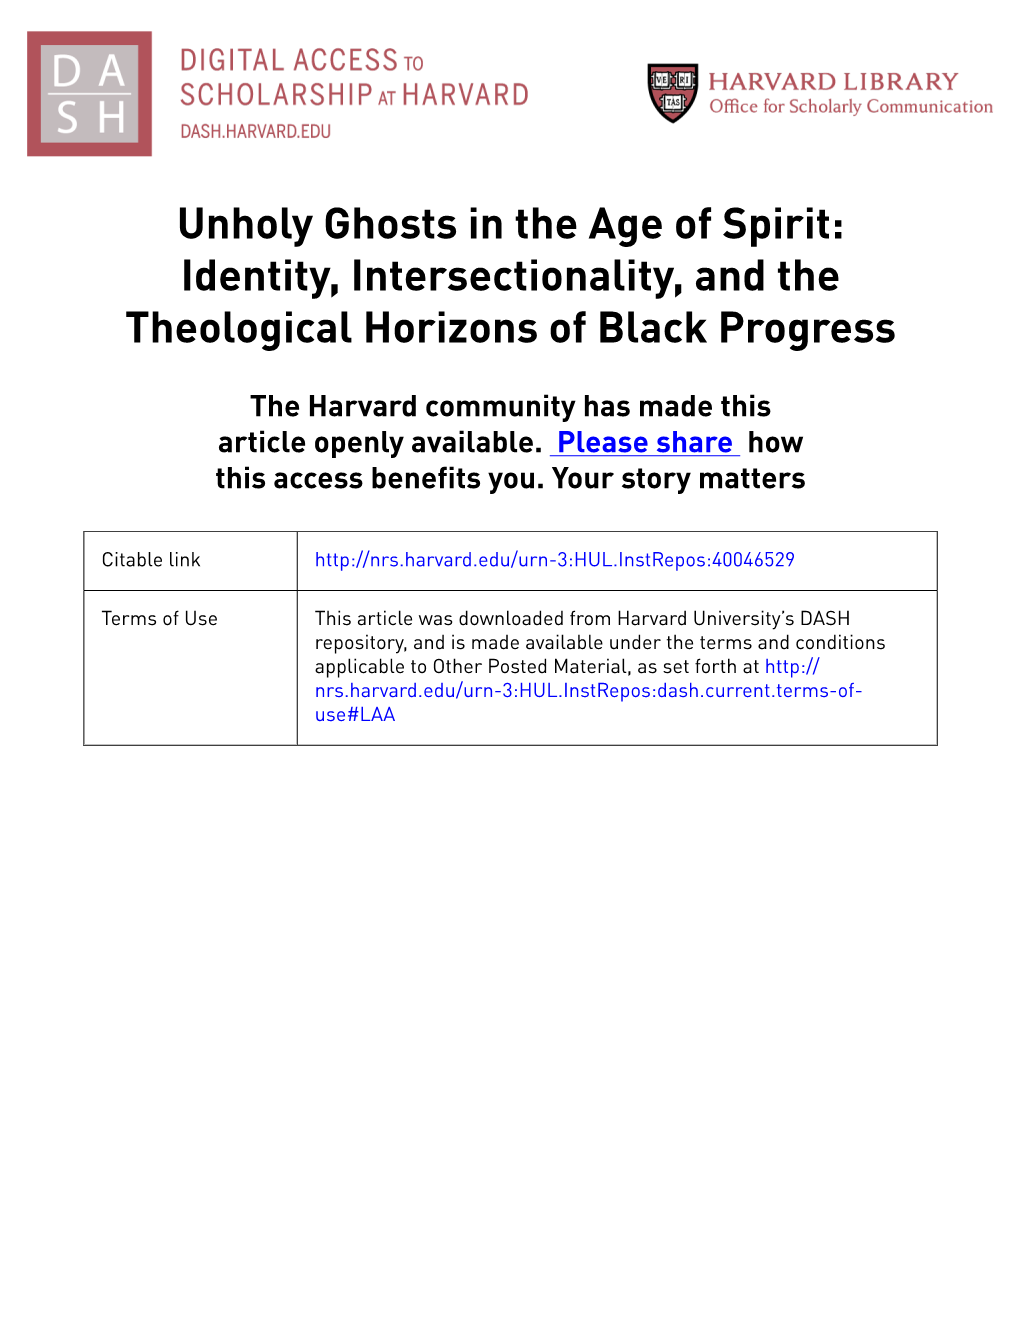 Unholy Ghosts in the Age of Spirit: Identity, Intersectionality, and the Theological Horizons of Black Progress